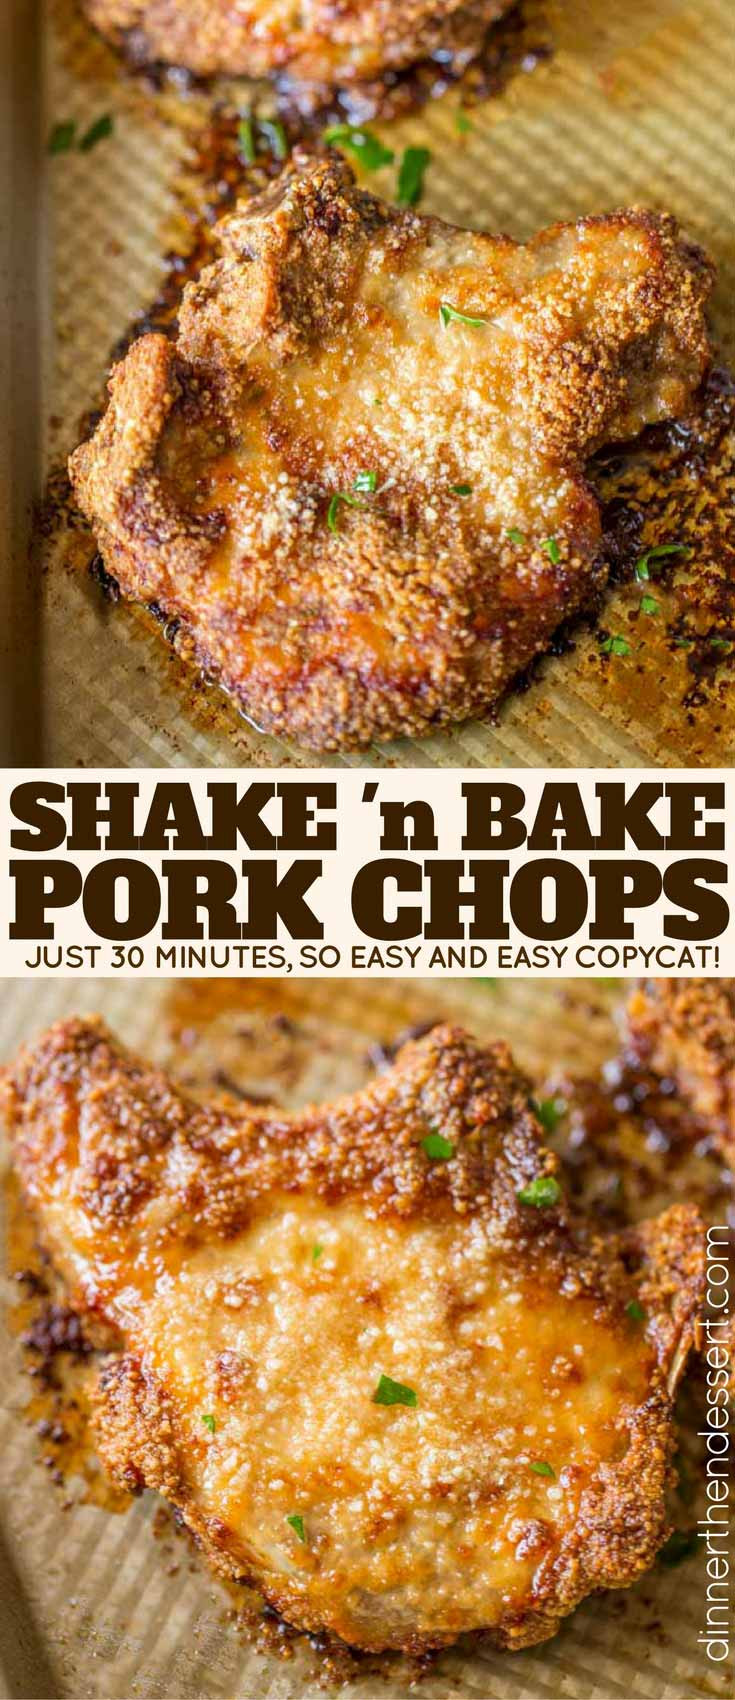 Shake N Bake Pork Chops
 shake n bake pork chops 1 inch thick